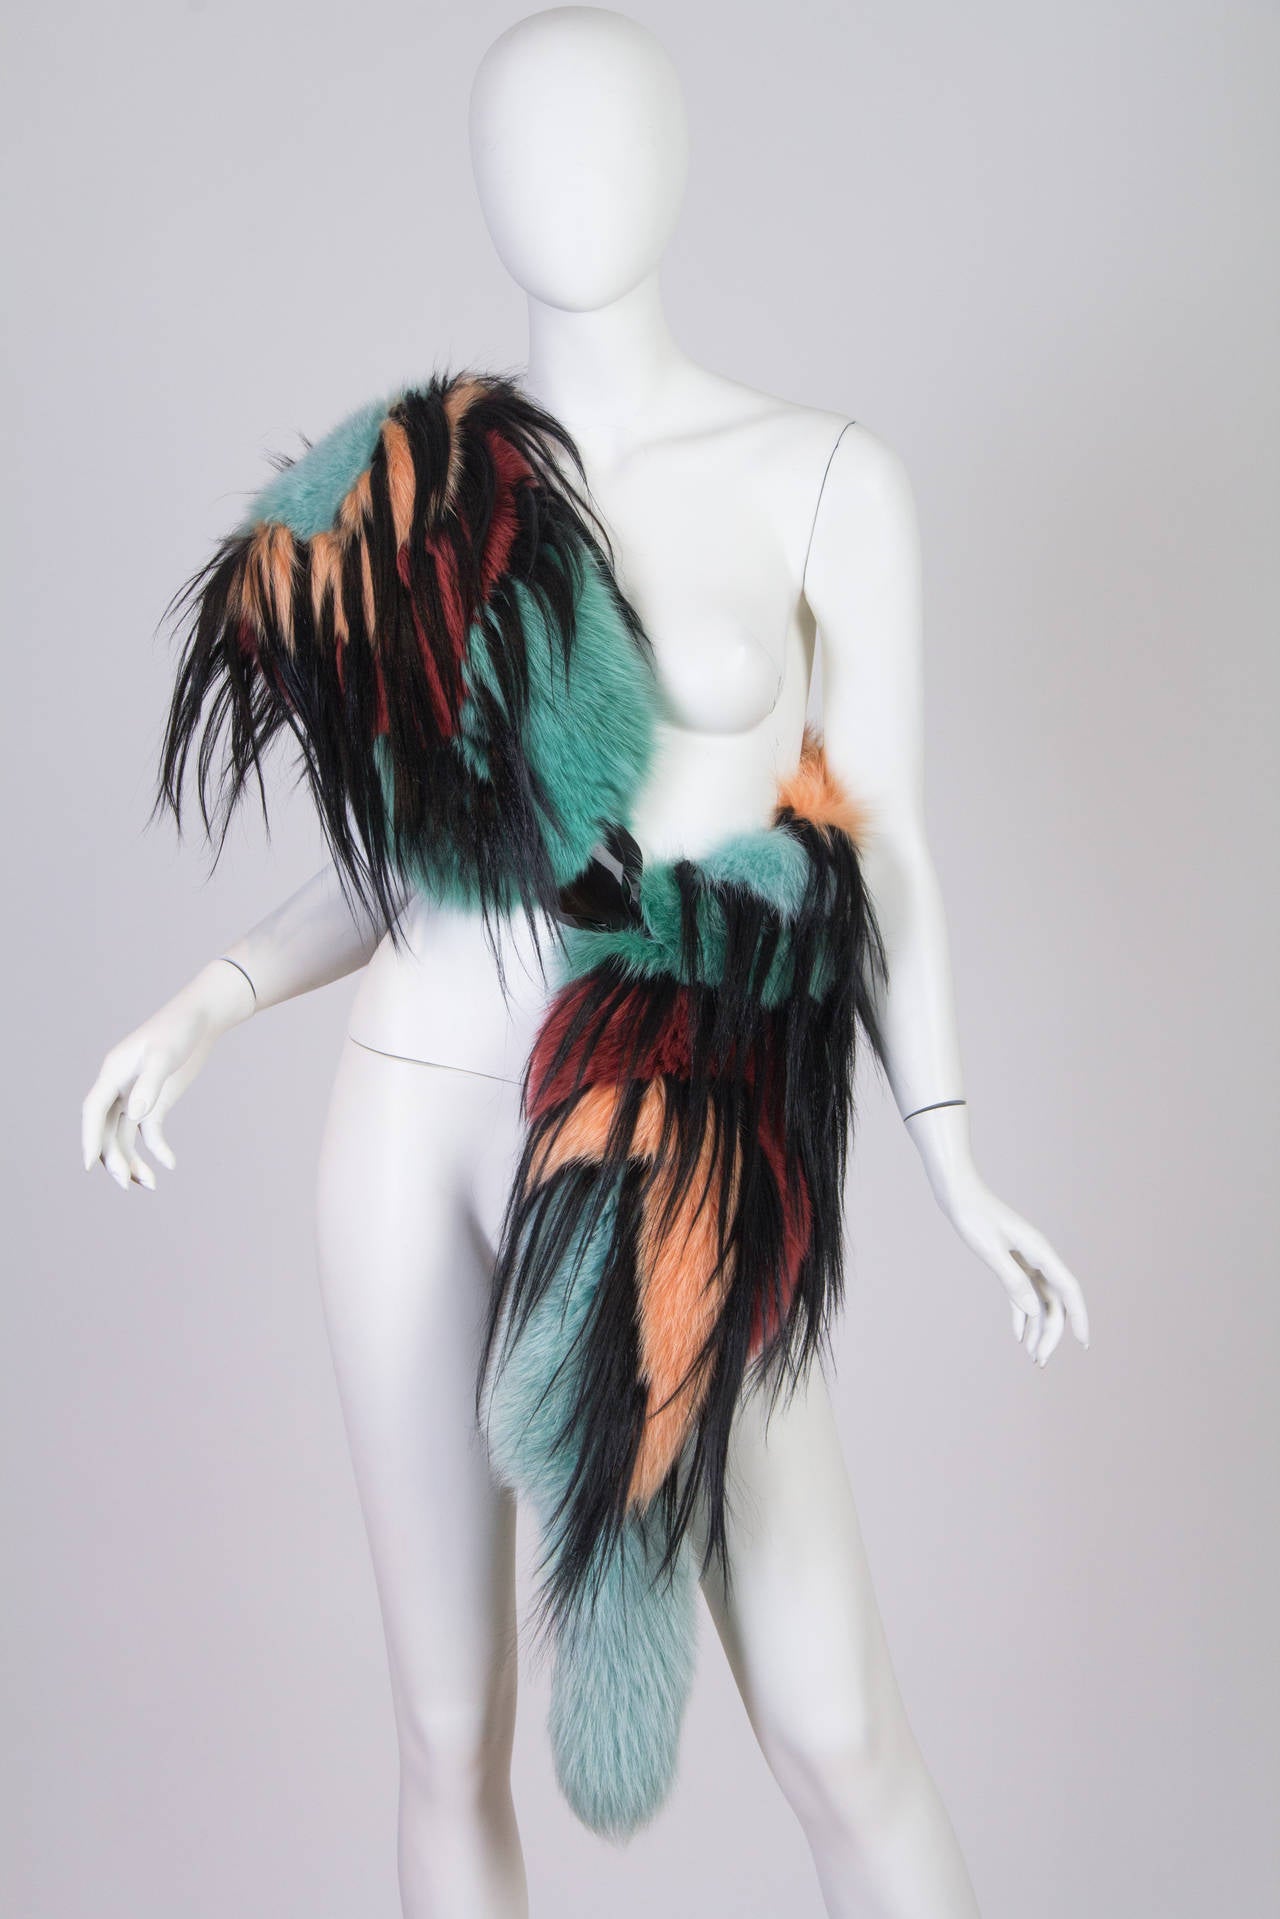 This is a striking and playful fur stole by top design house Missoni. The multicoloured and multi-textured garment is made to mimic the form of a classic fox stole – complete with a tail and ‘beak’ – but with the bright colours and zig-zag patterns